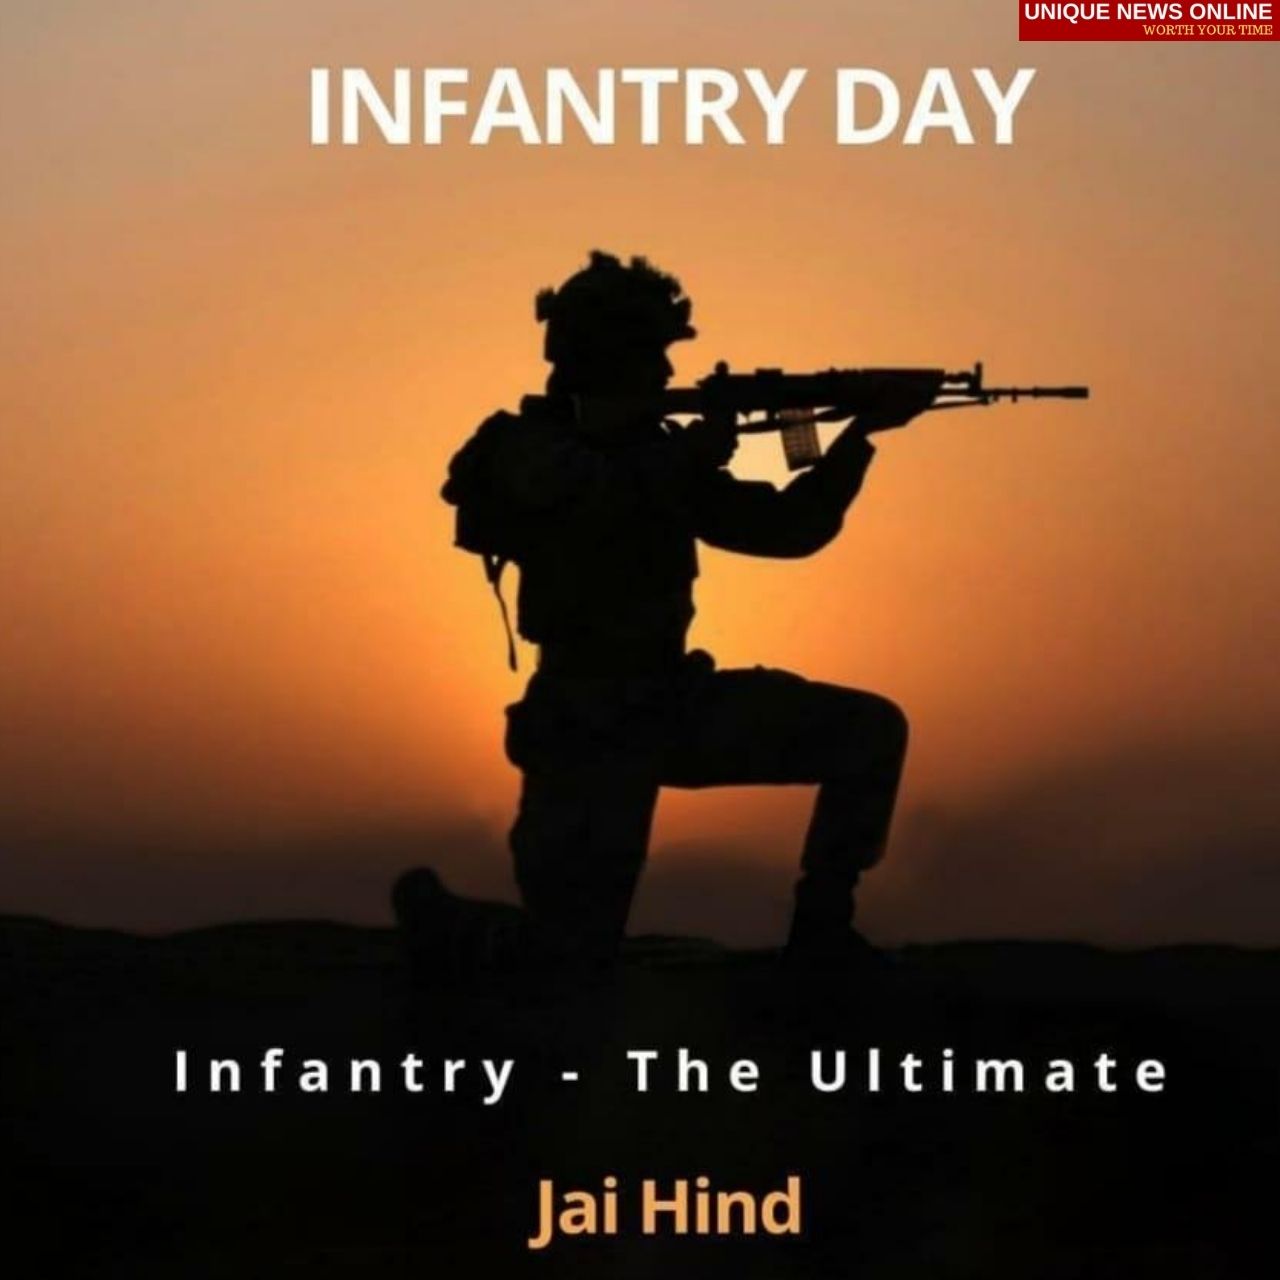 Infantry Day 2021 Quotes, Wishes, HD Images, Messages, and Greetings to Share